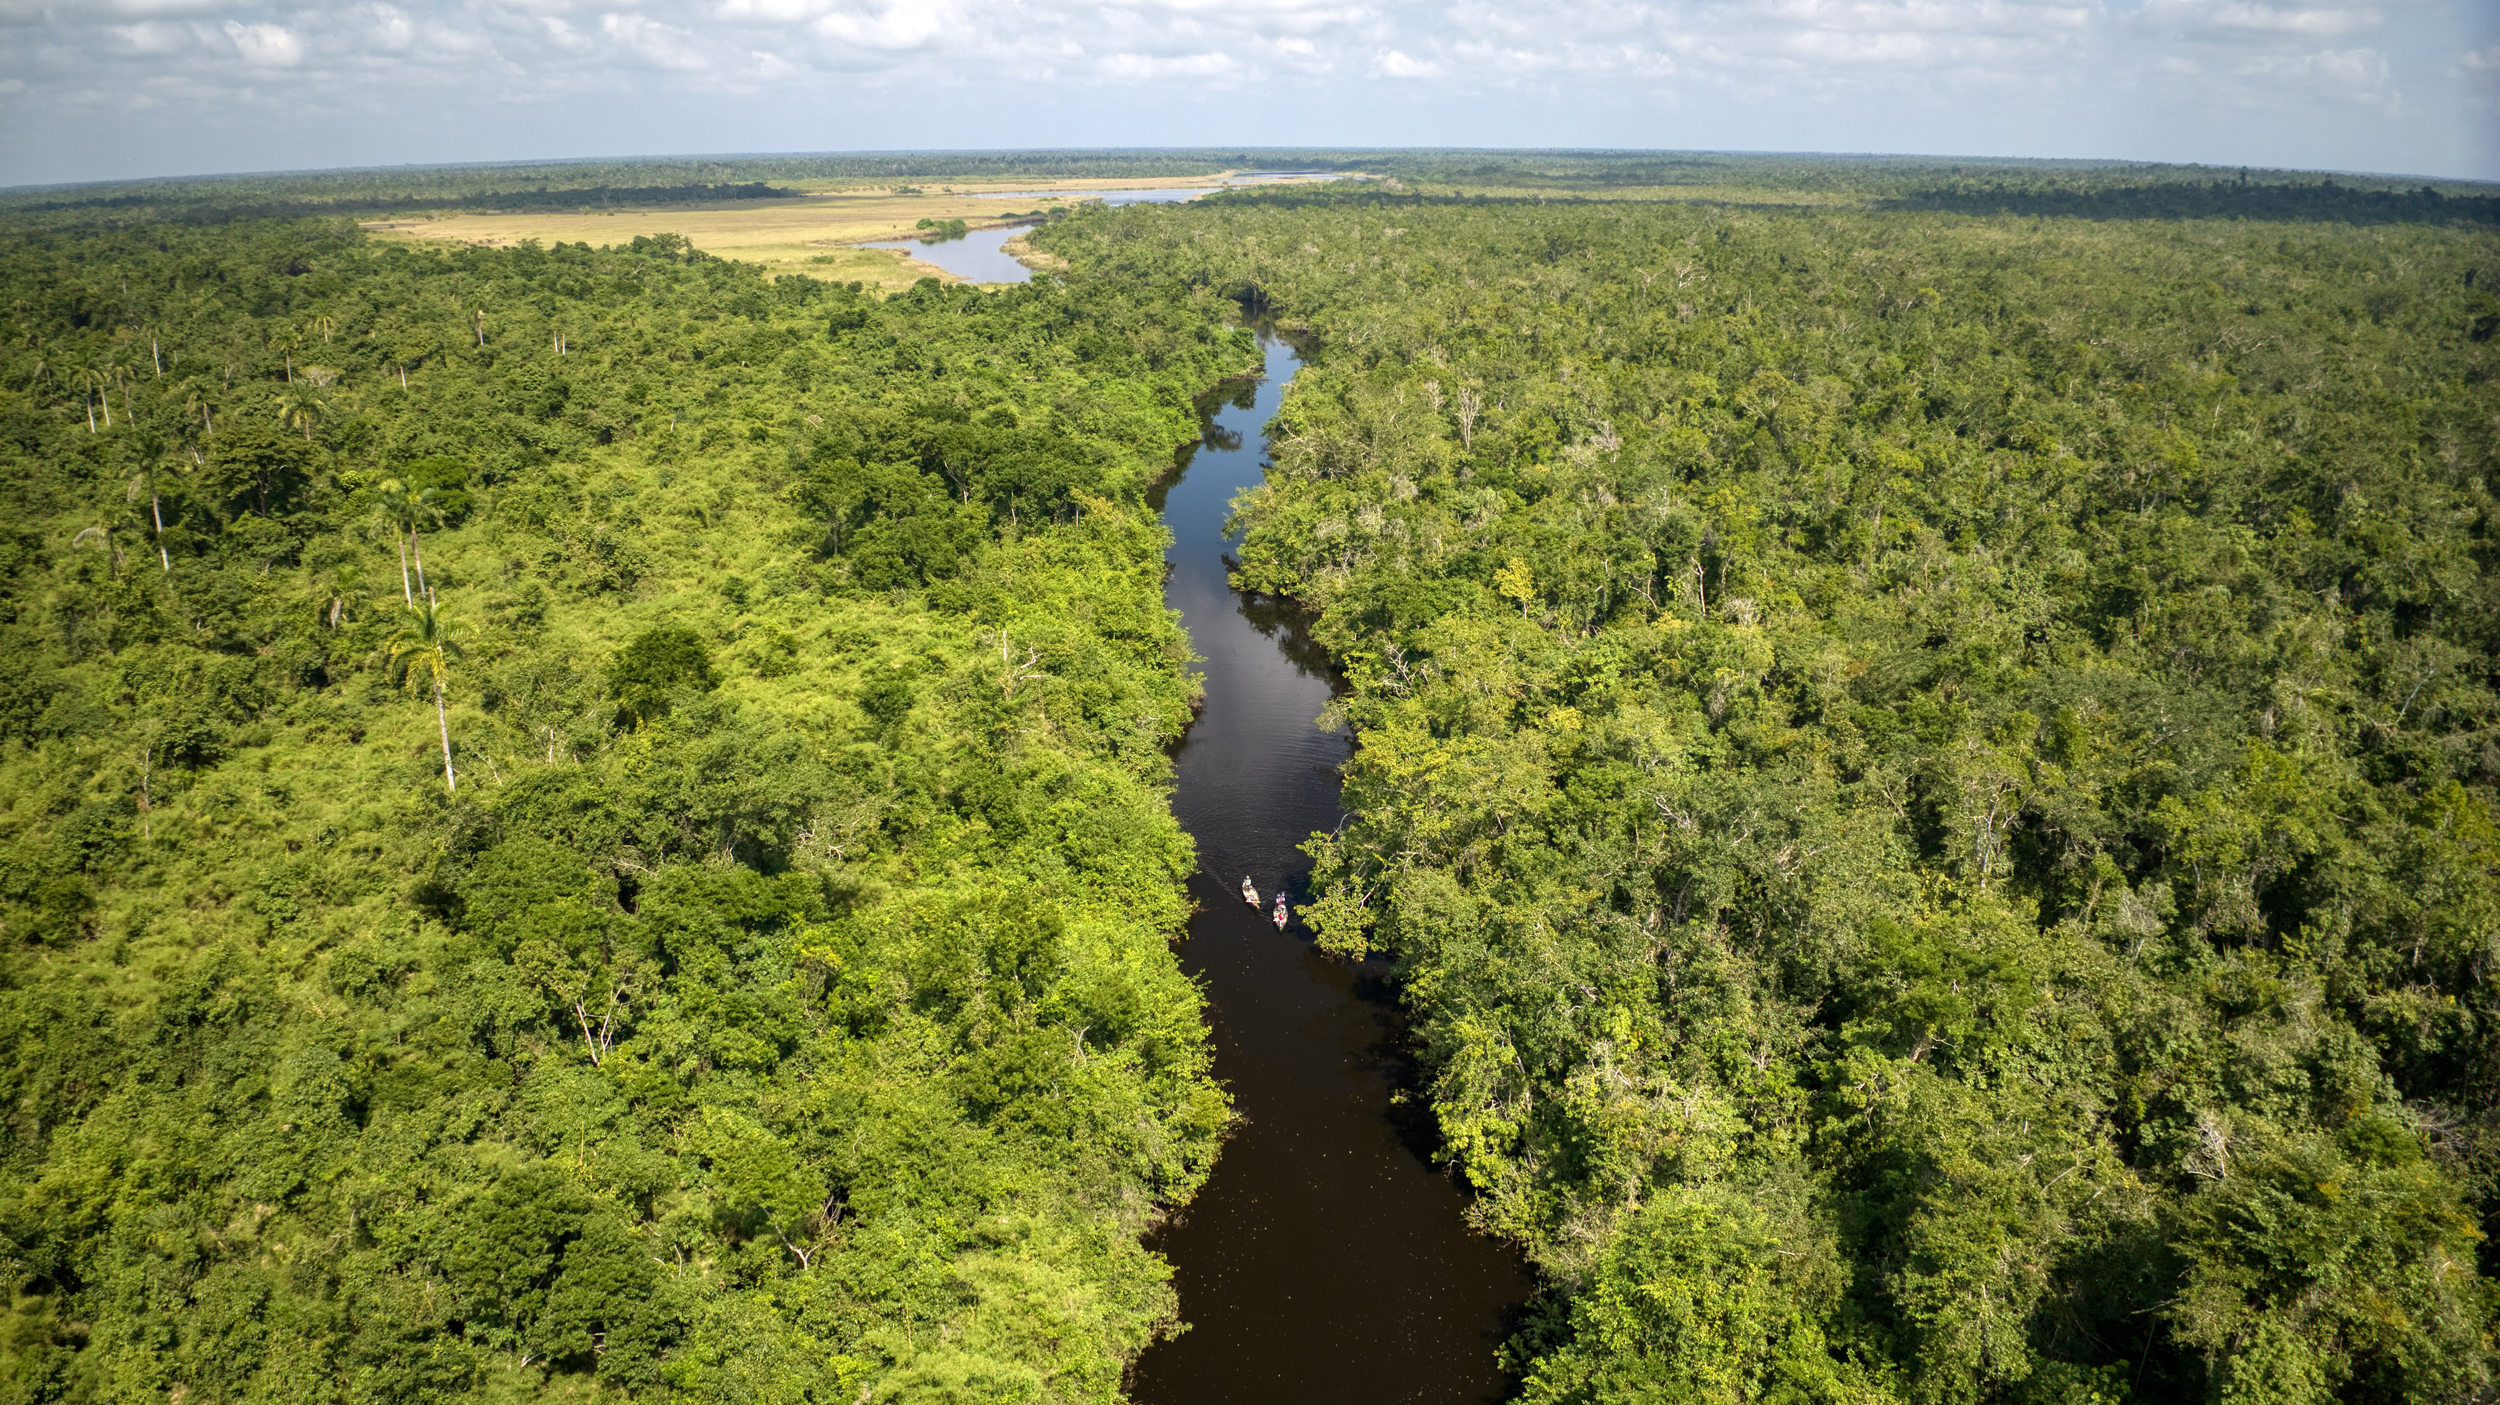 The Maya Forest Corridor is a 2.5 mile-wide stretch of forest, wetlands and savanna that connects the jungles of southern Belize with forests in the north and in Guatemala and Mexico. Together, this Selva Maya is the largest tropical forest north of the Amazon. Credit: Kevin Quischan